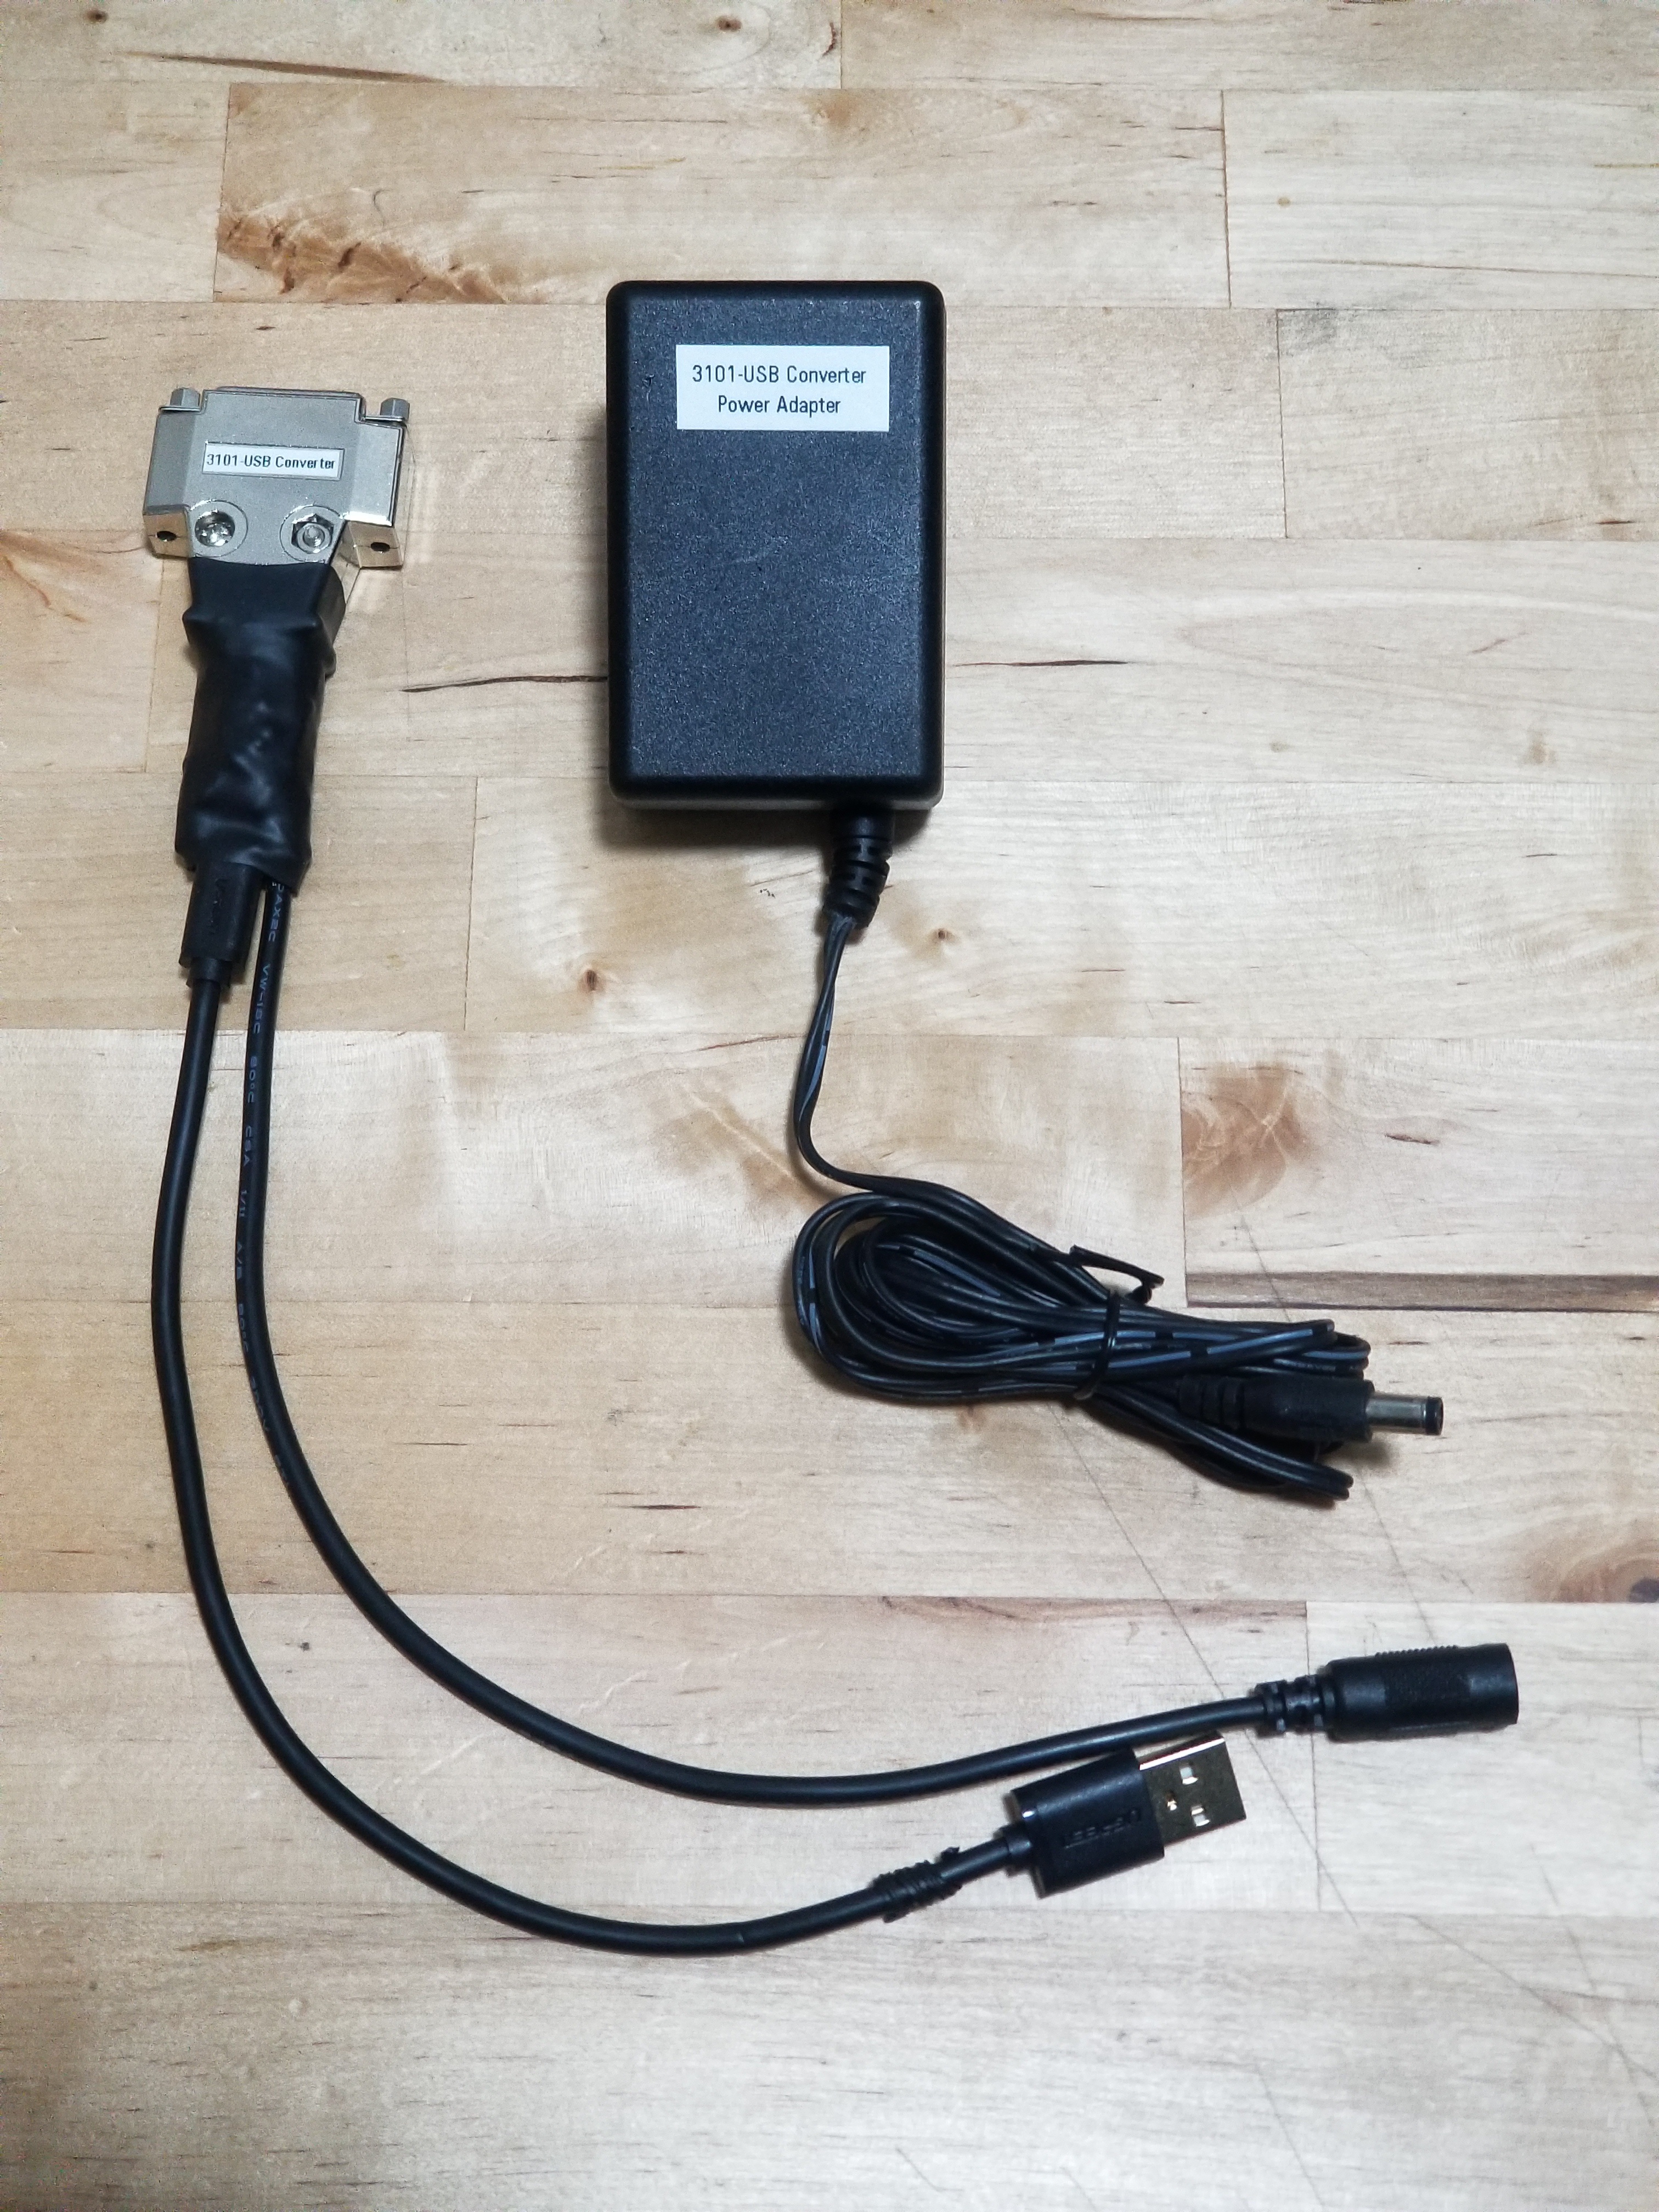 db15 to usb converter adapter cable connector